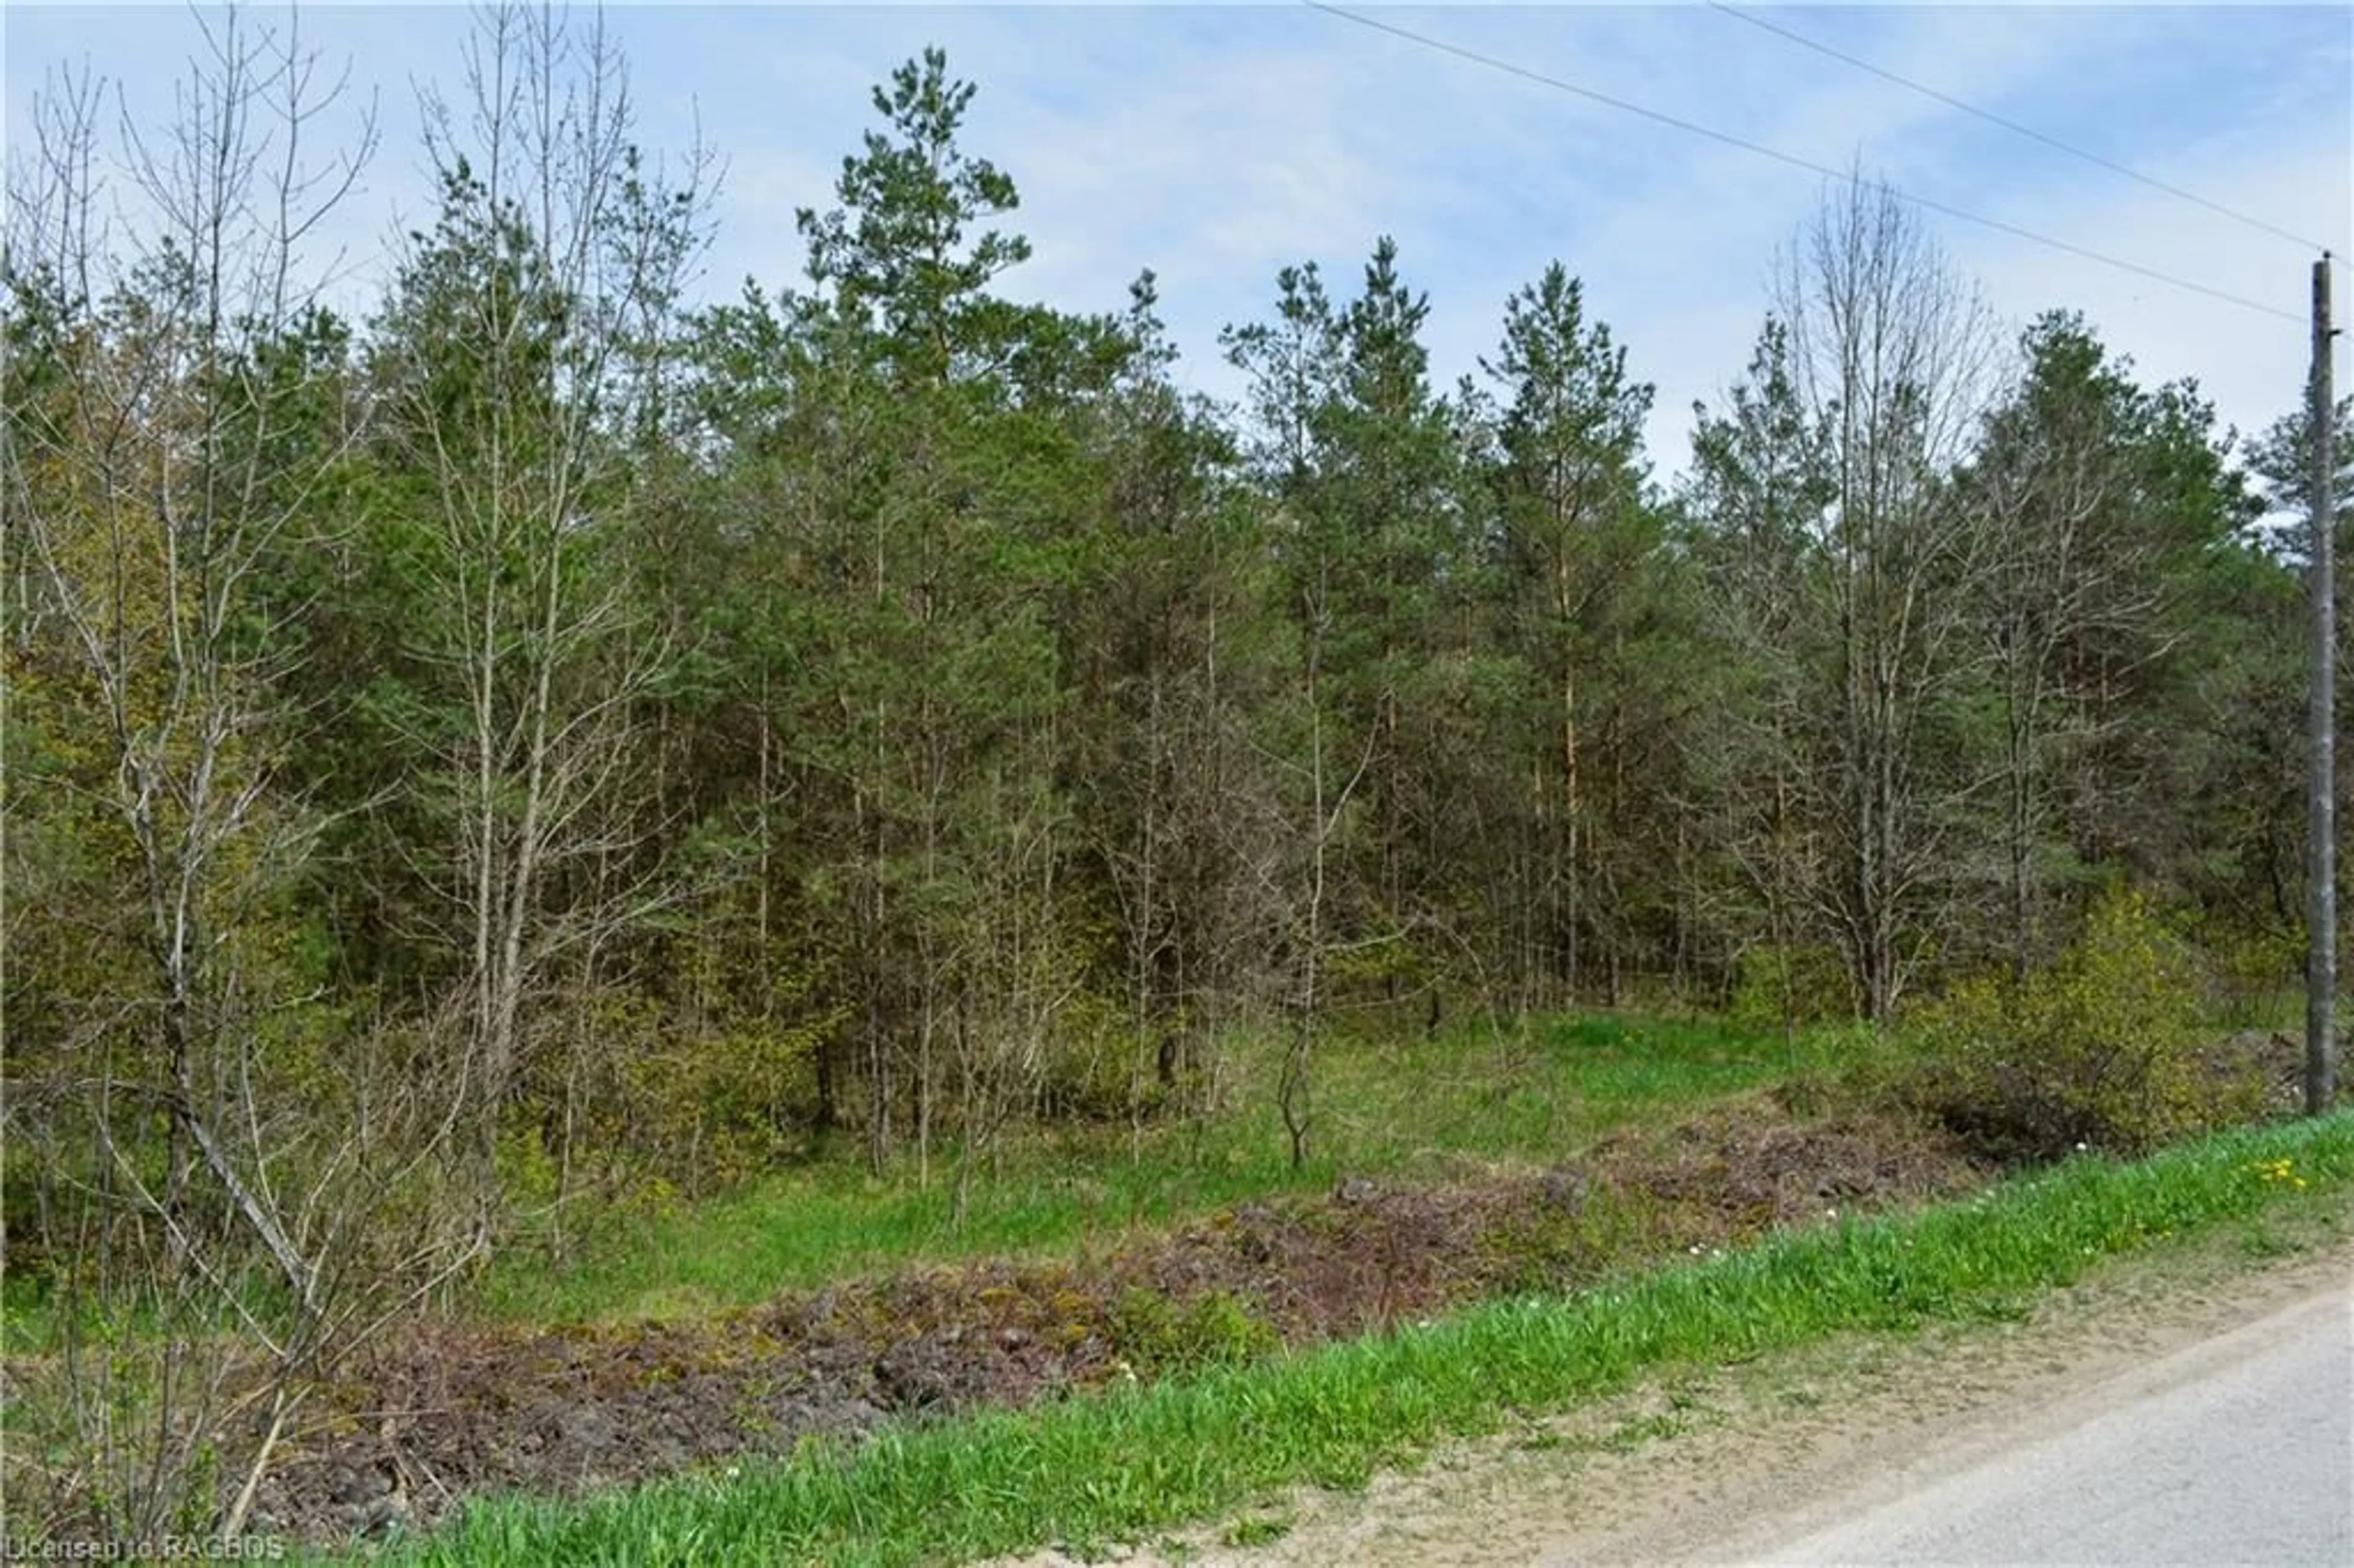 Forest view for CON 3 EGR PT LO Concession, Chatsworth Ontario N0H 2V0